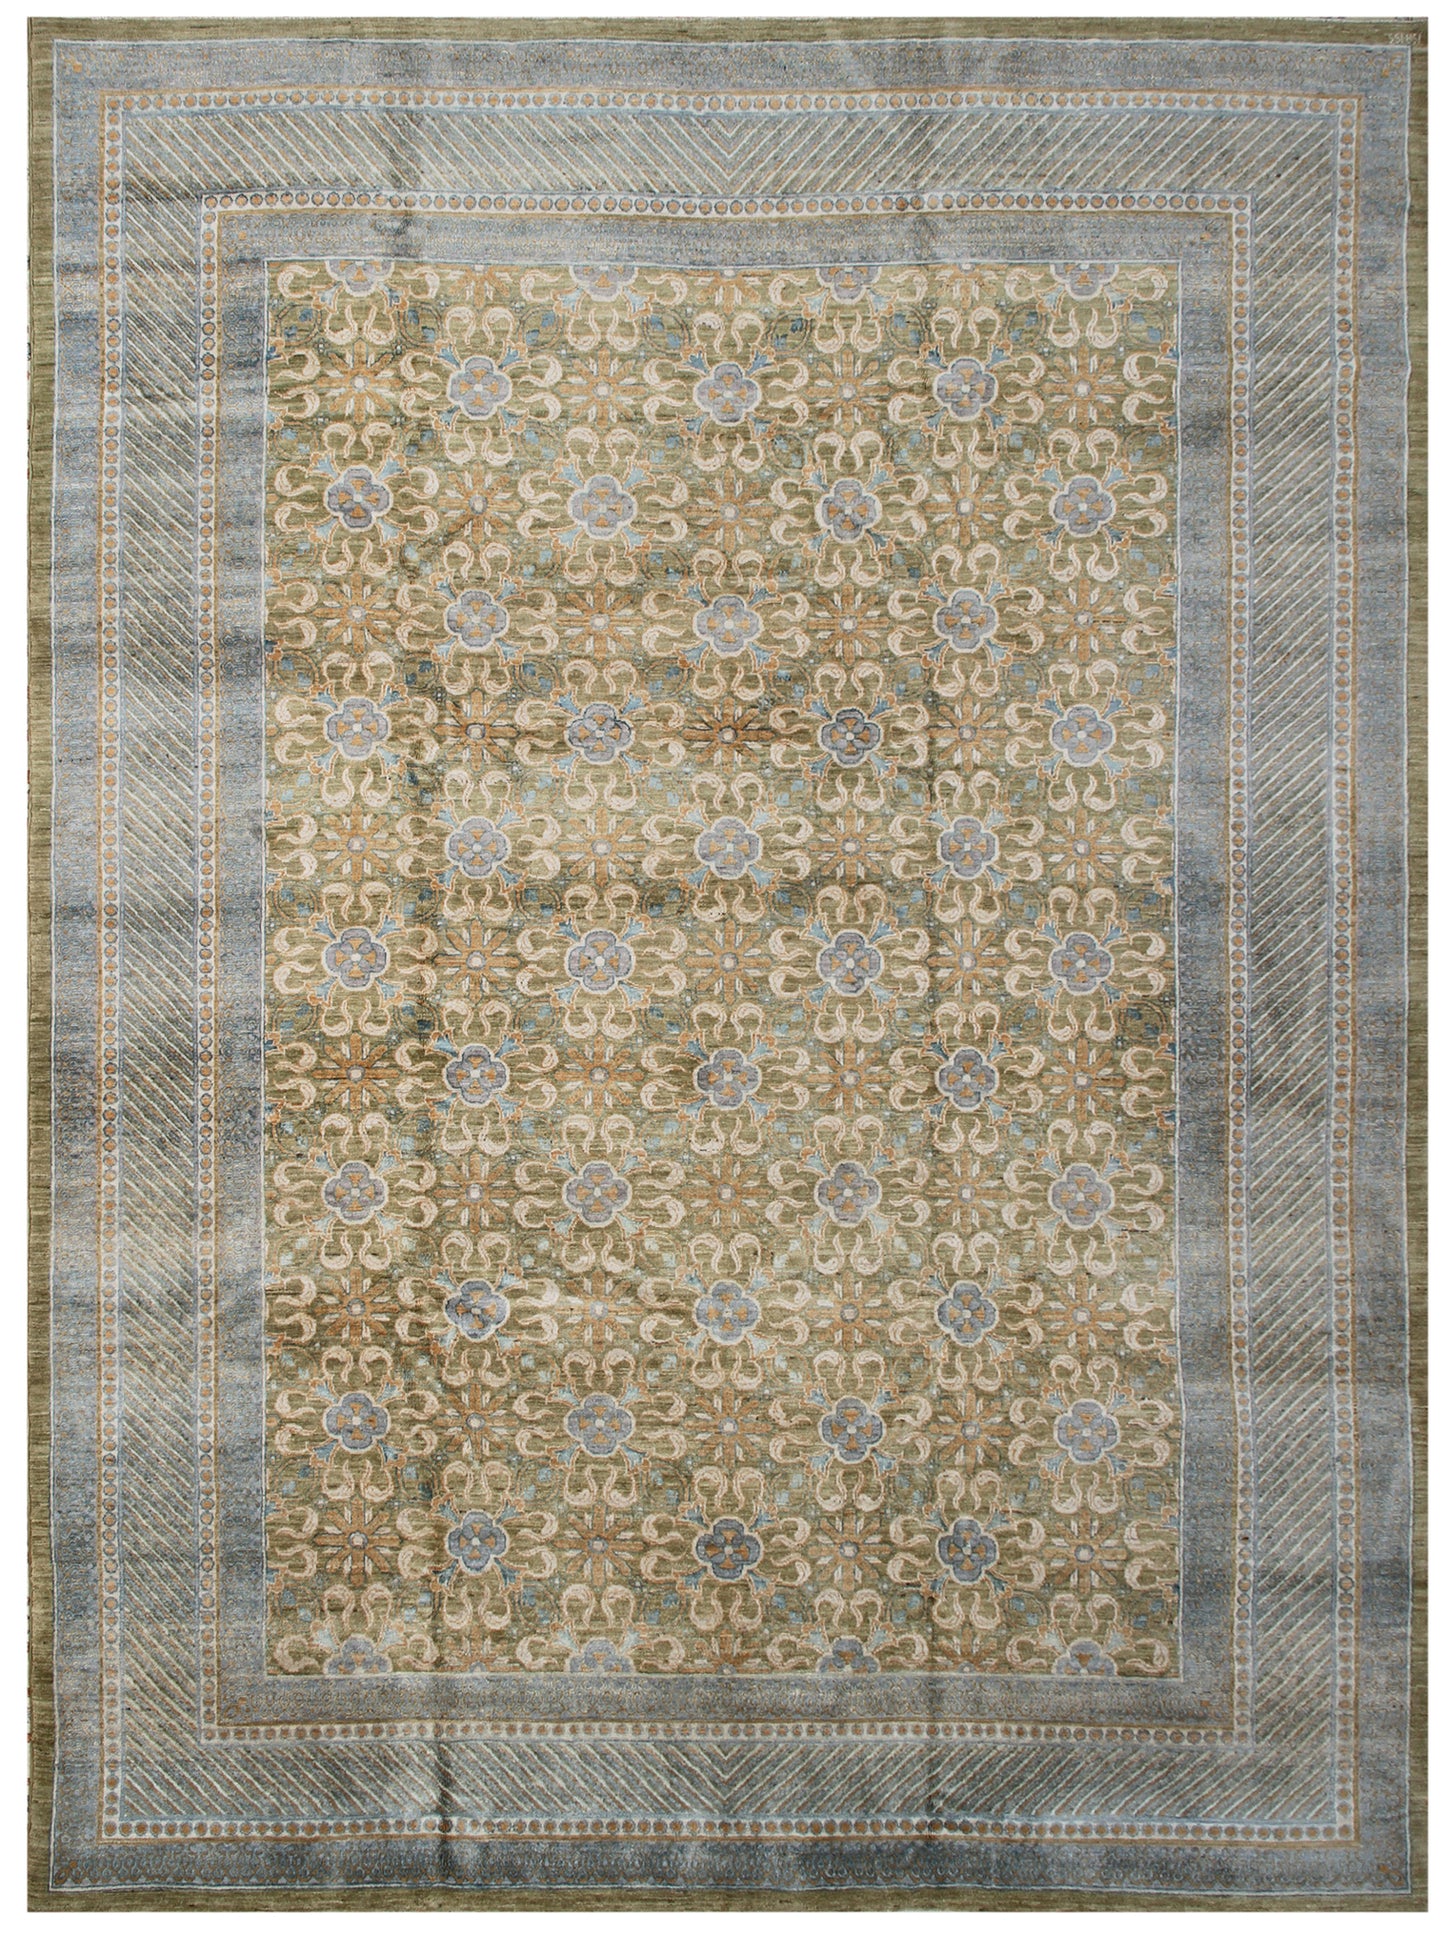 9'x12' Ariana Traditional Floral Design rug